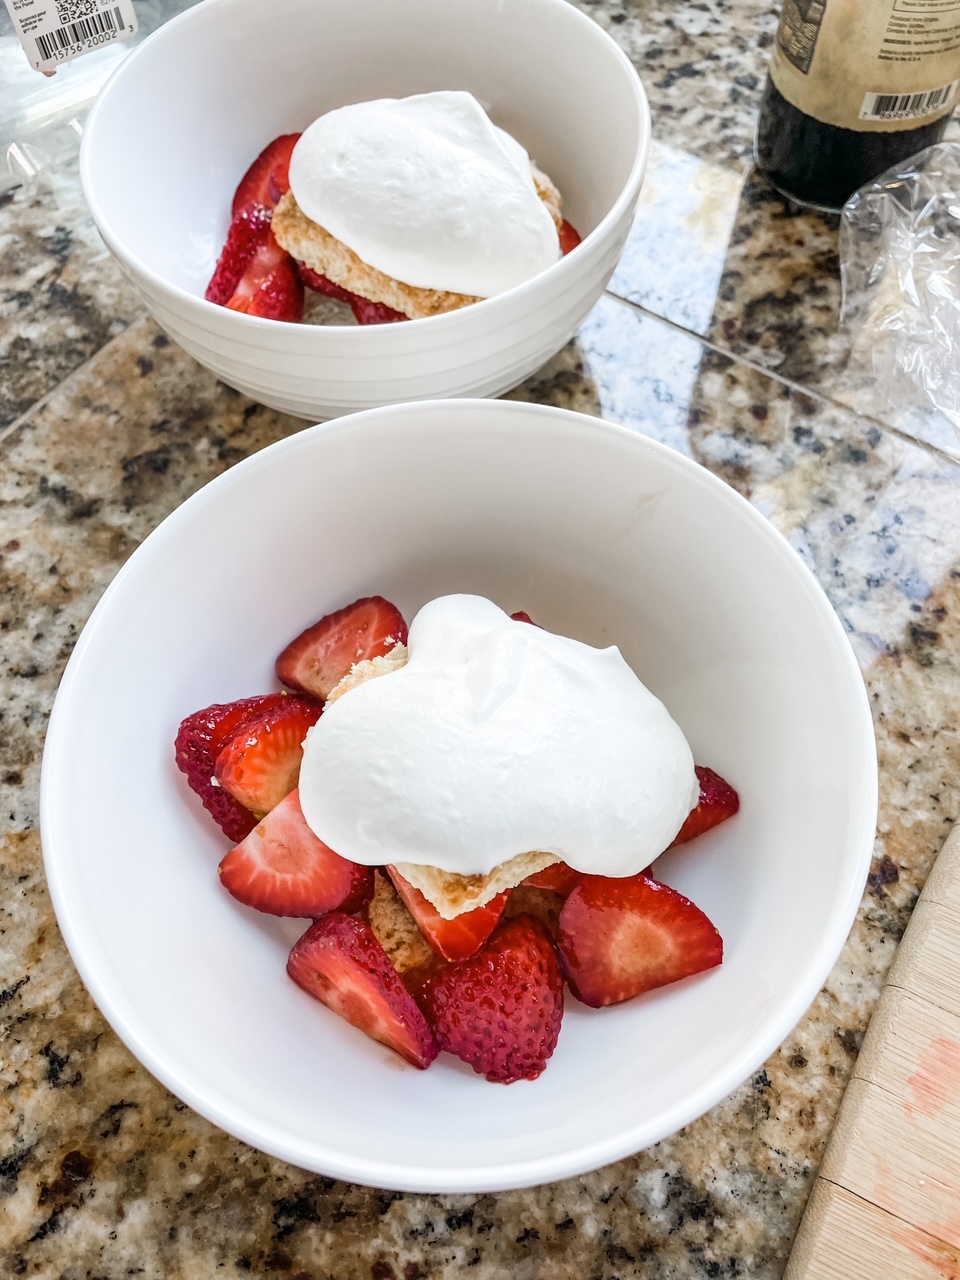 The finished Homemade Shortcake Biscuits topped with strawberries, whipped cream, served in white bowls